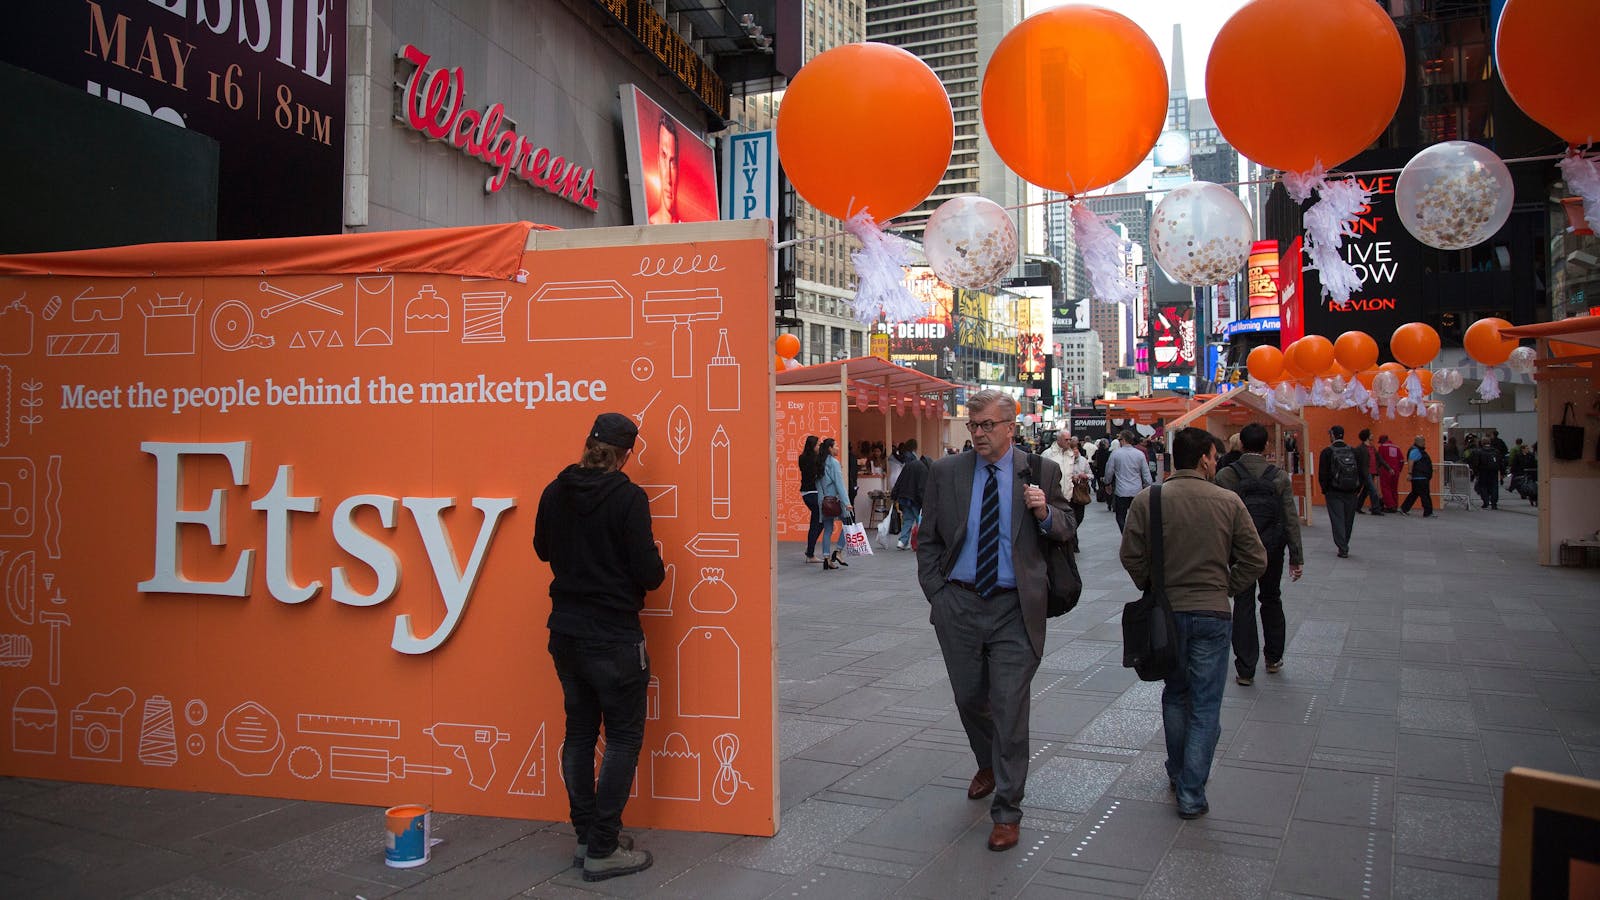 Merchants who use Etsy display their wares outside the Nasdaq MarketSite in New York the day Etsy went public last year. Photo by Bloomberg.